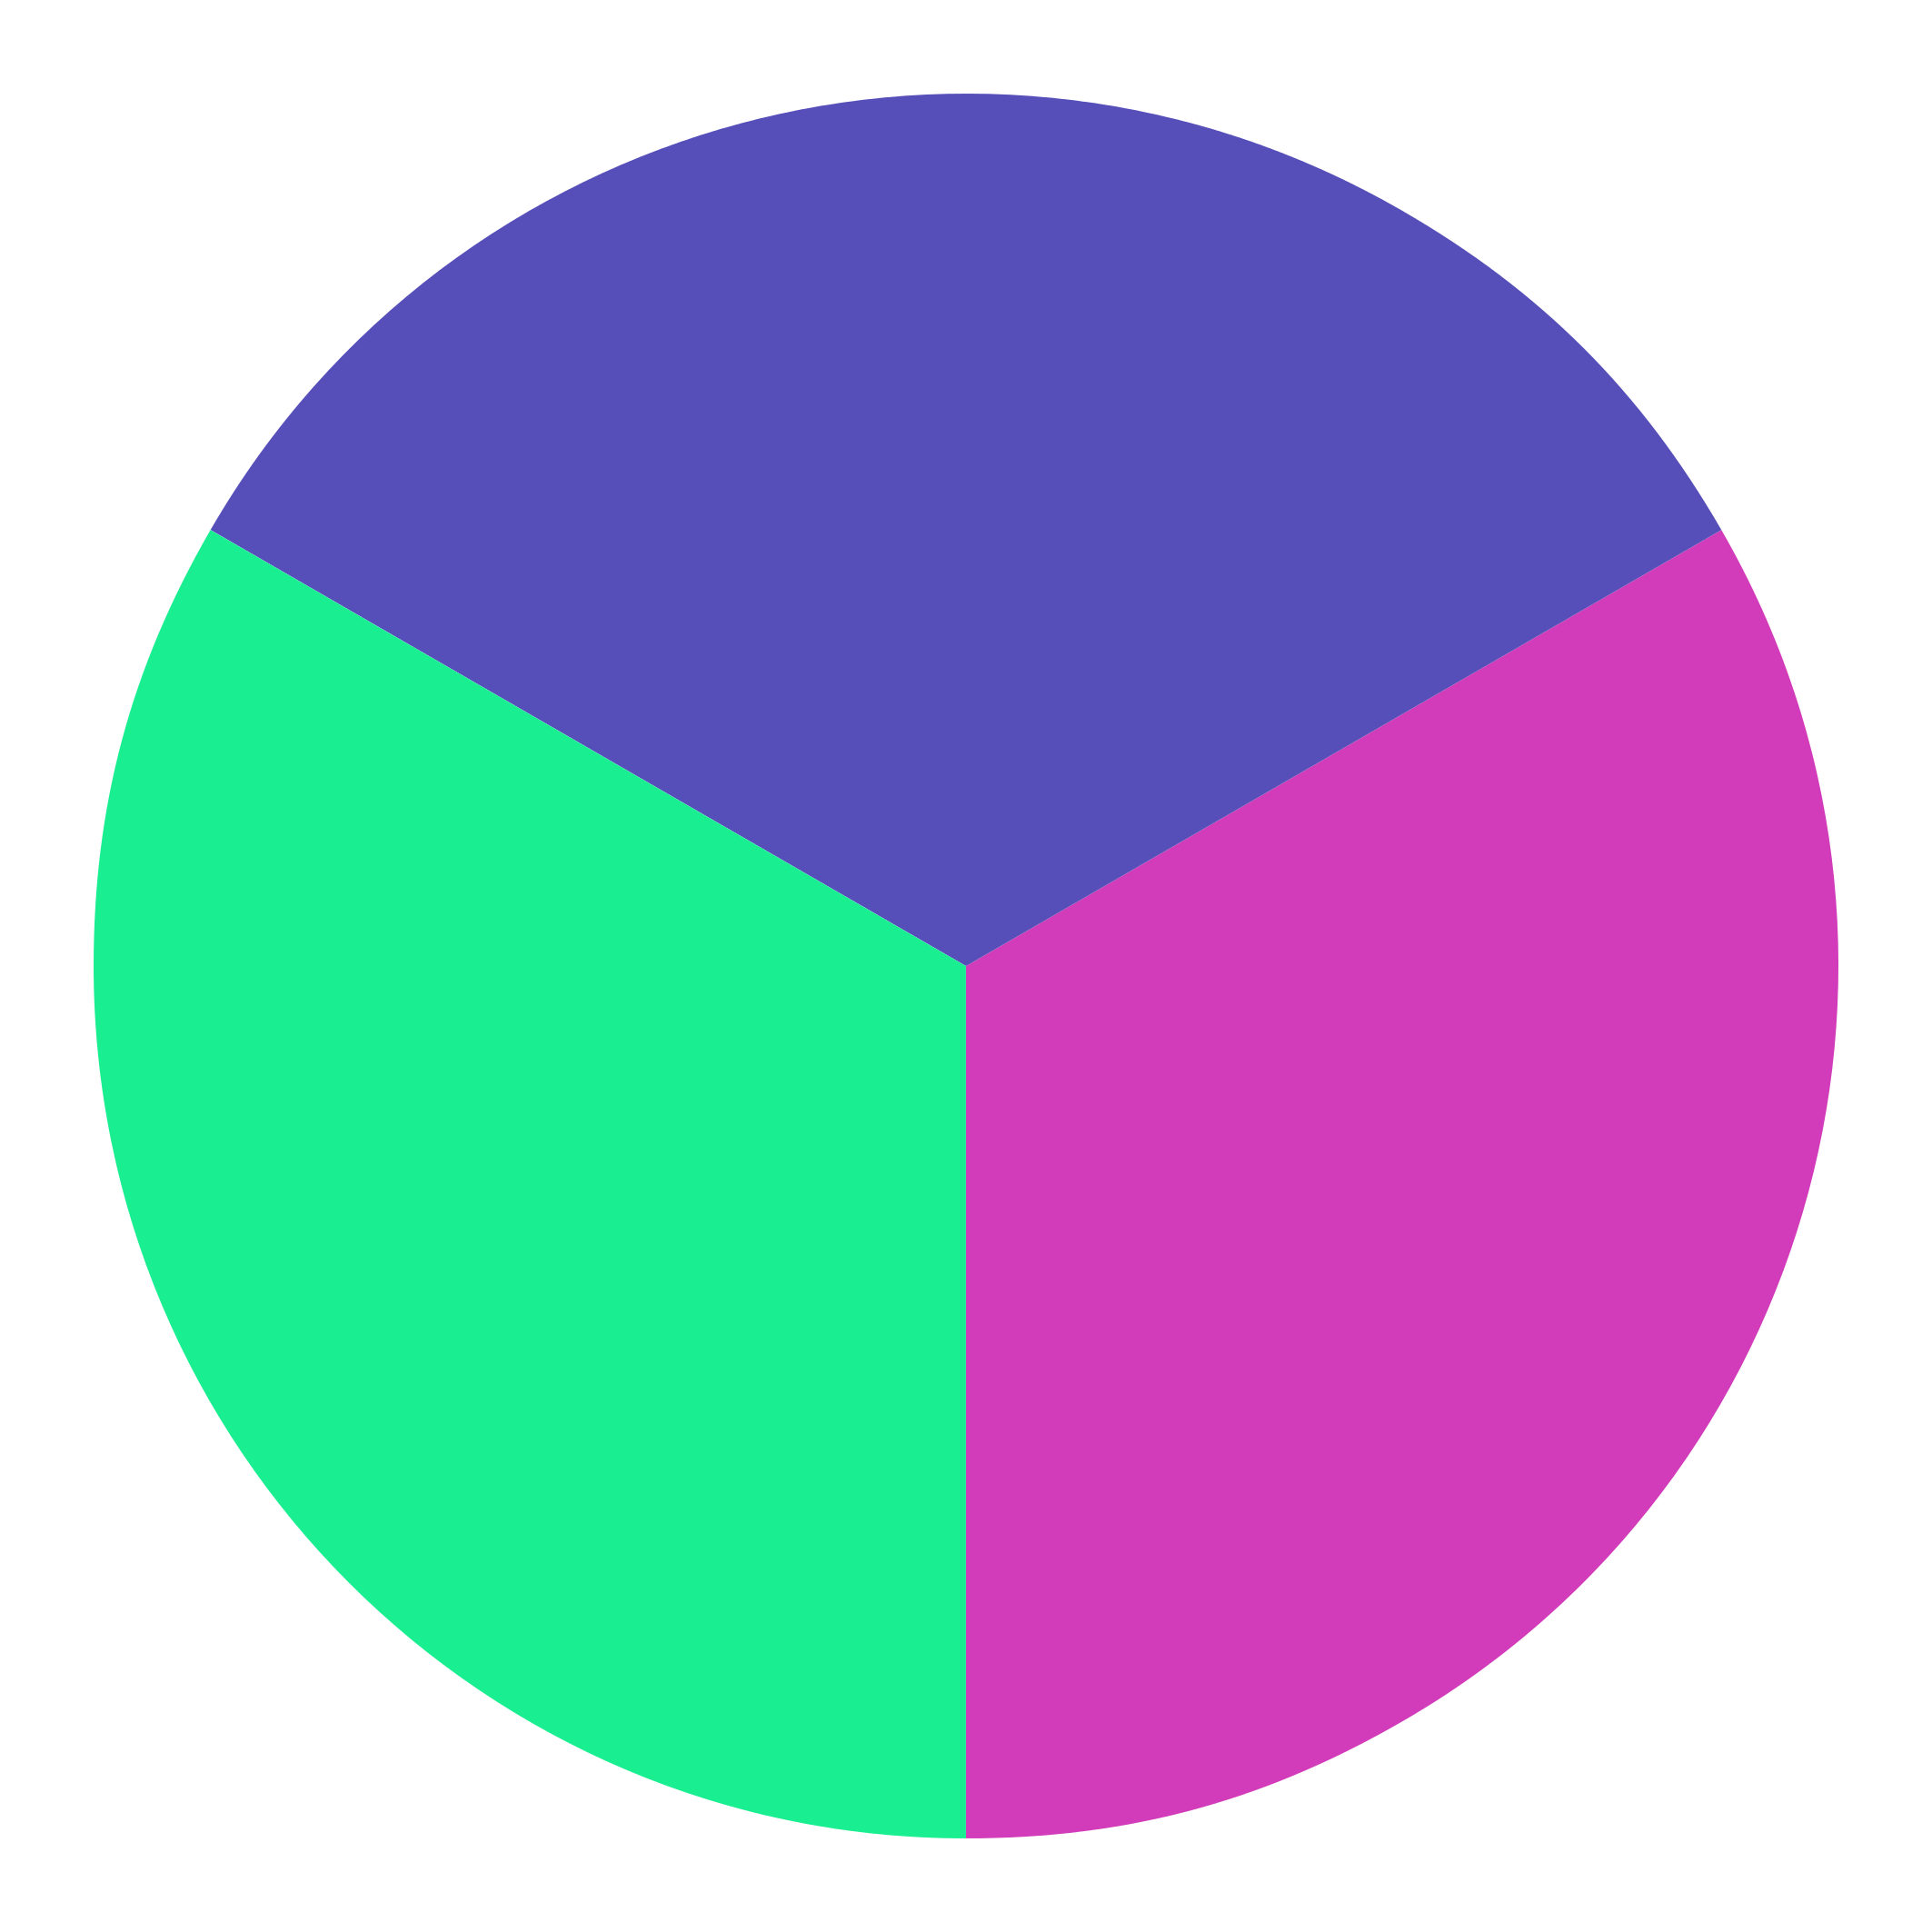 A Colorful Circle With Three Different Colored Circles